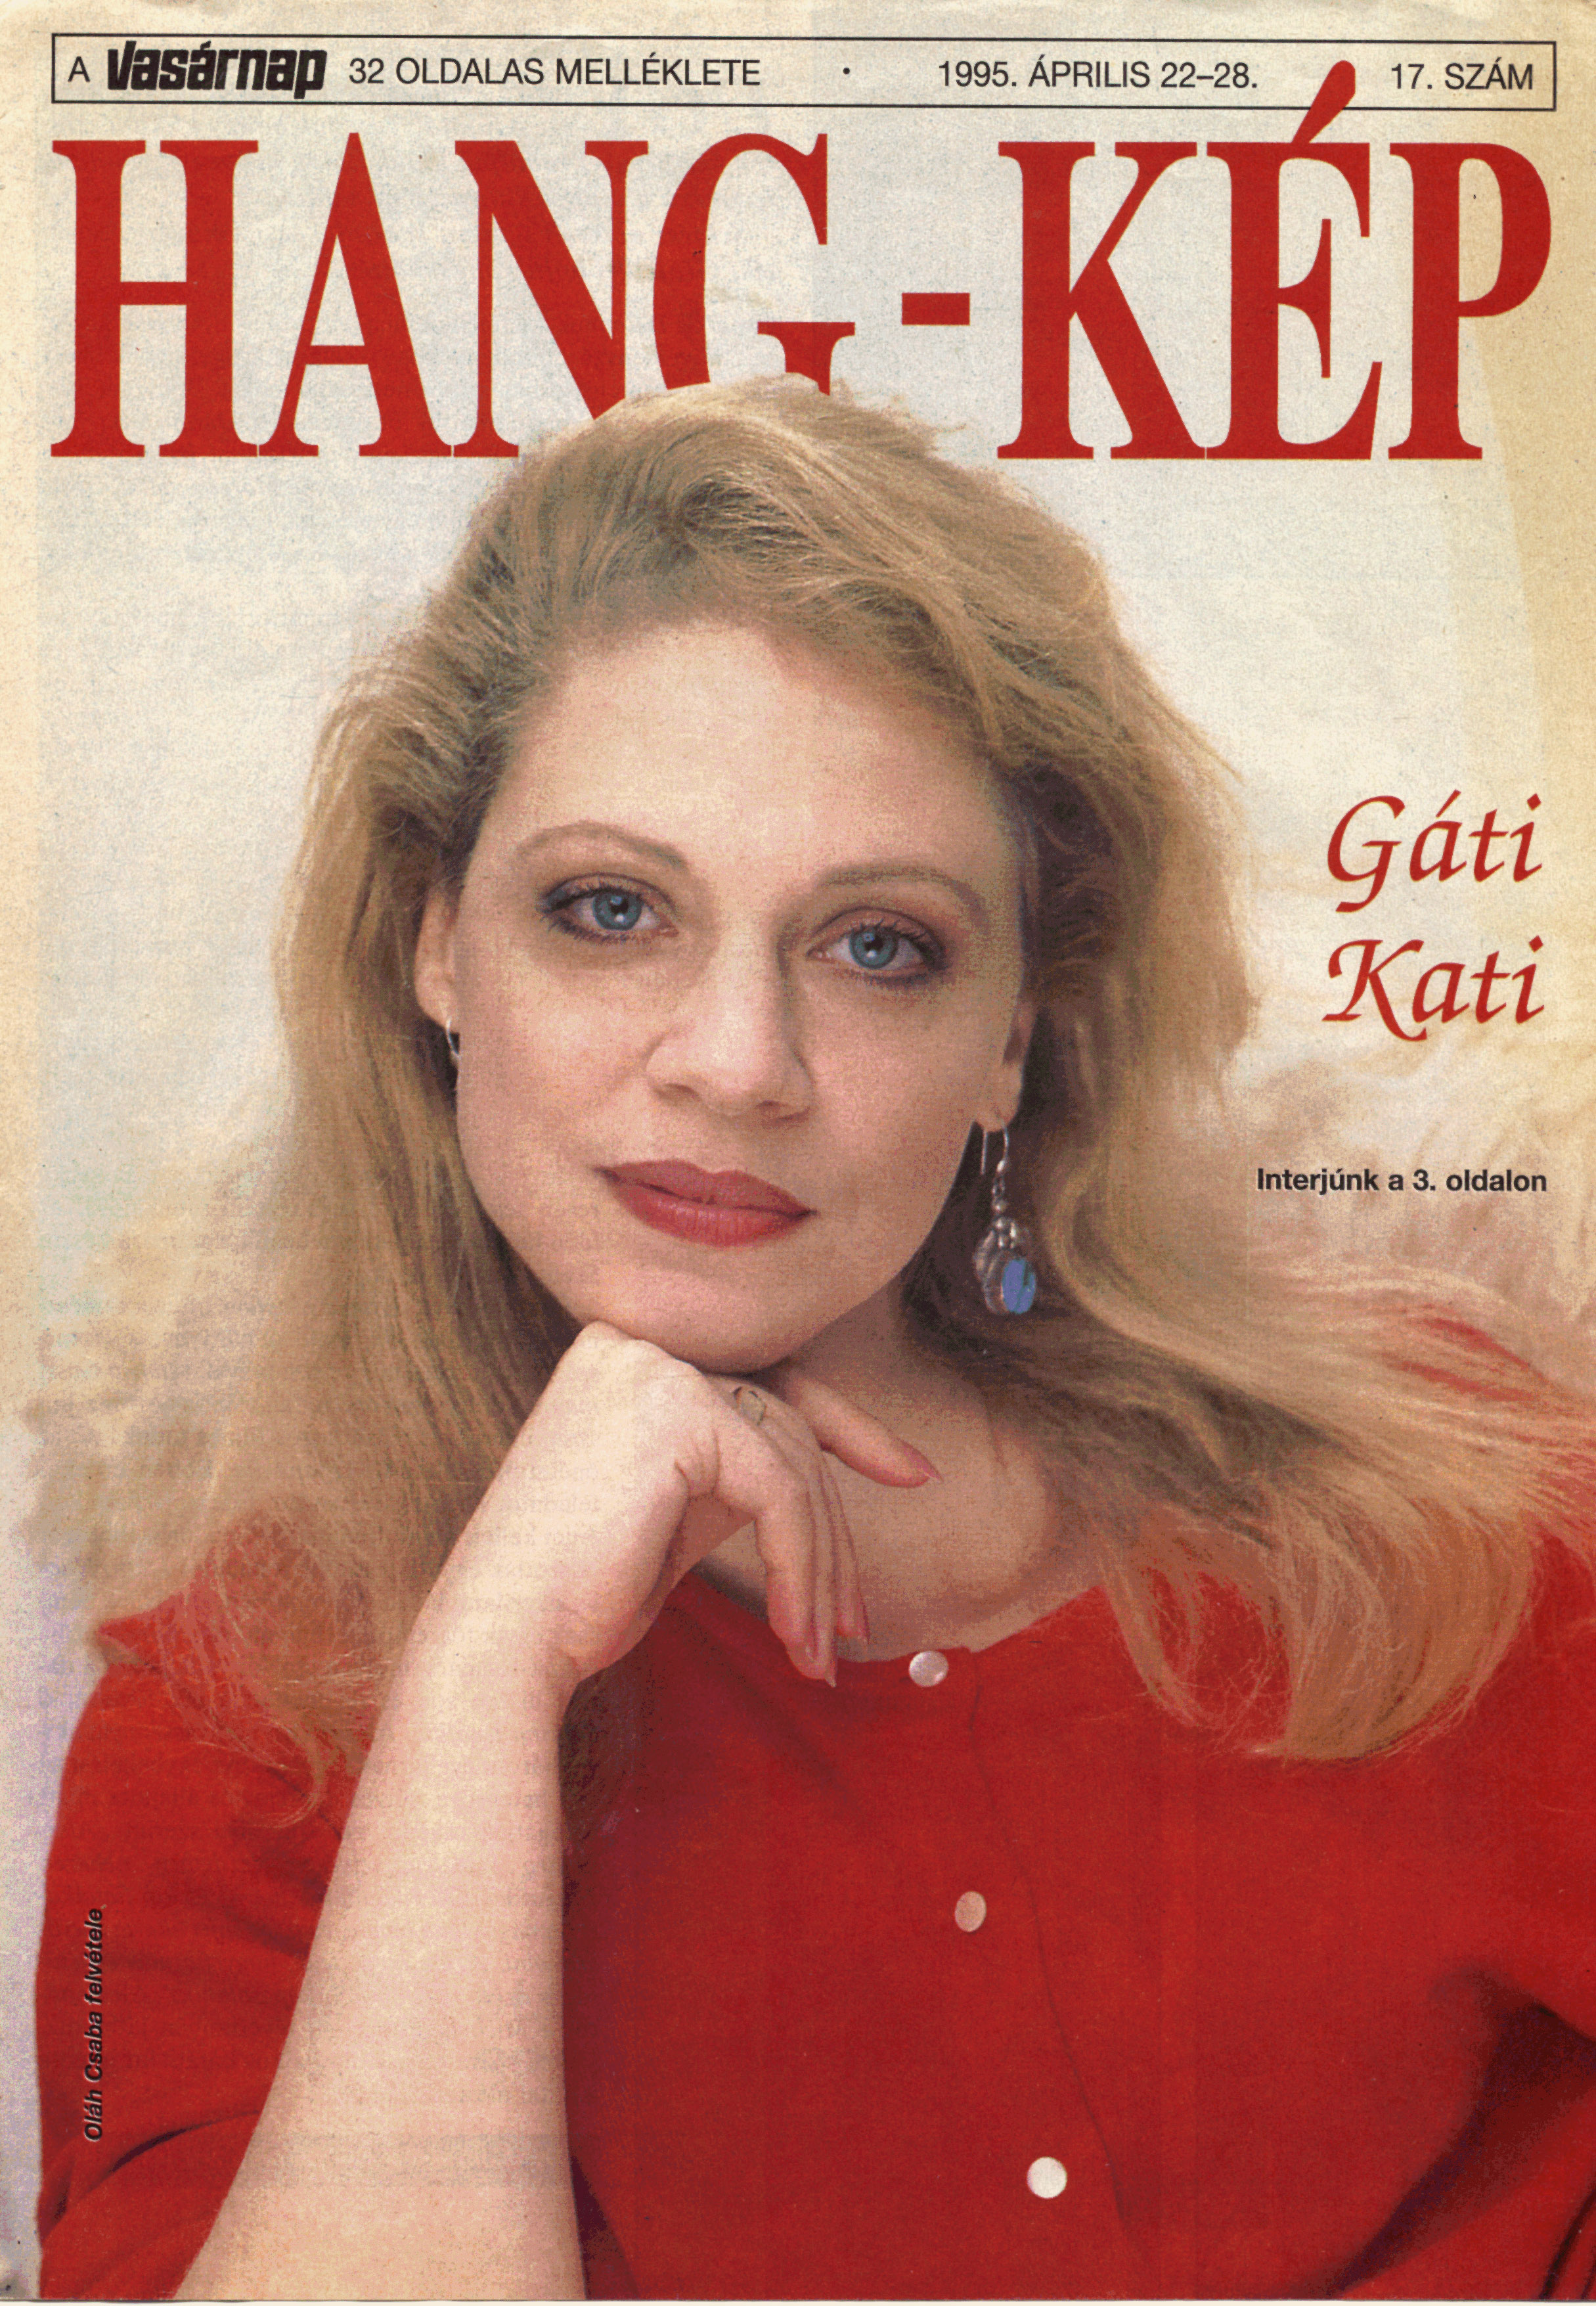 On the cover of Hang Kép Magazine.